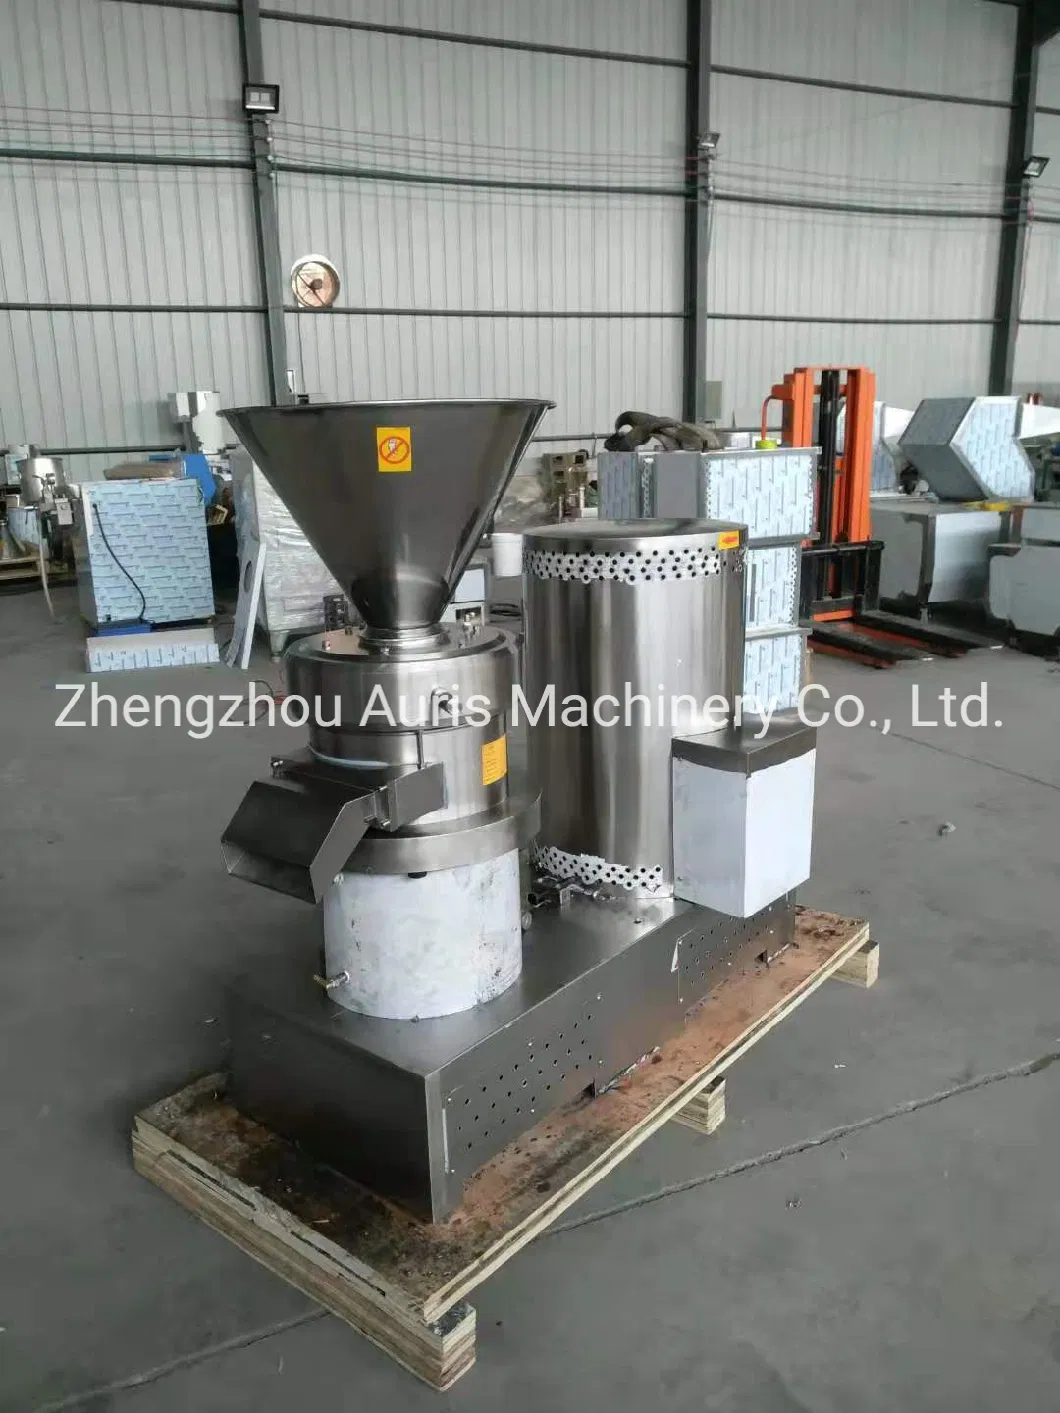 Fr-210 Larget Capacity Automatic Food Colloid Mill for Coffee Powder